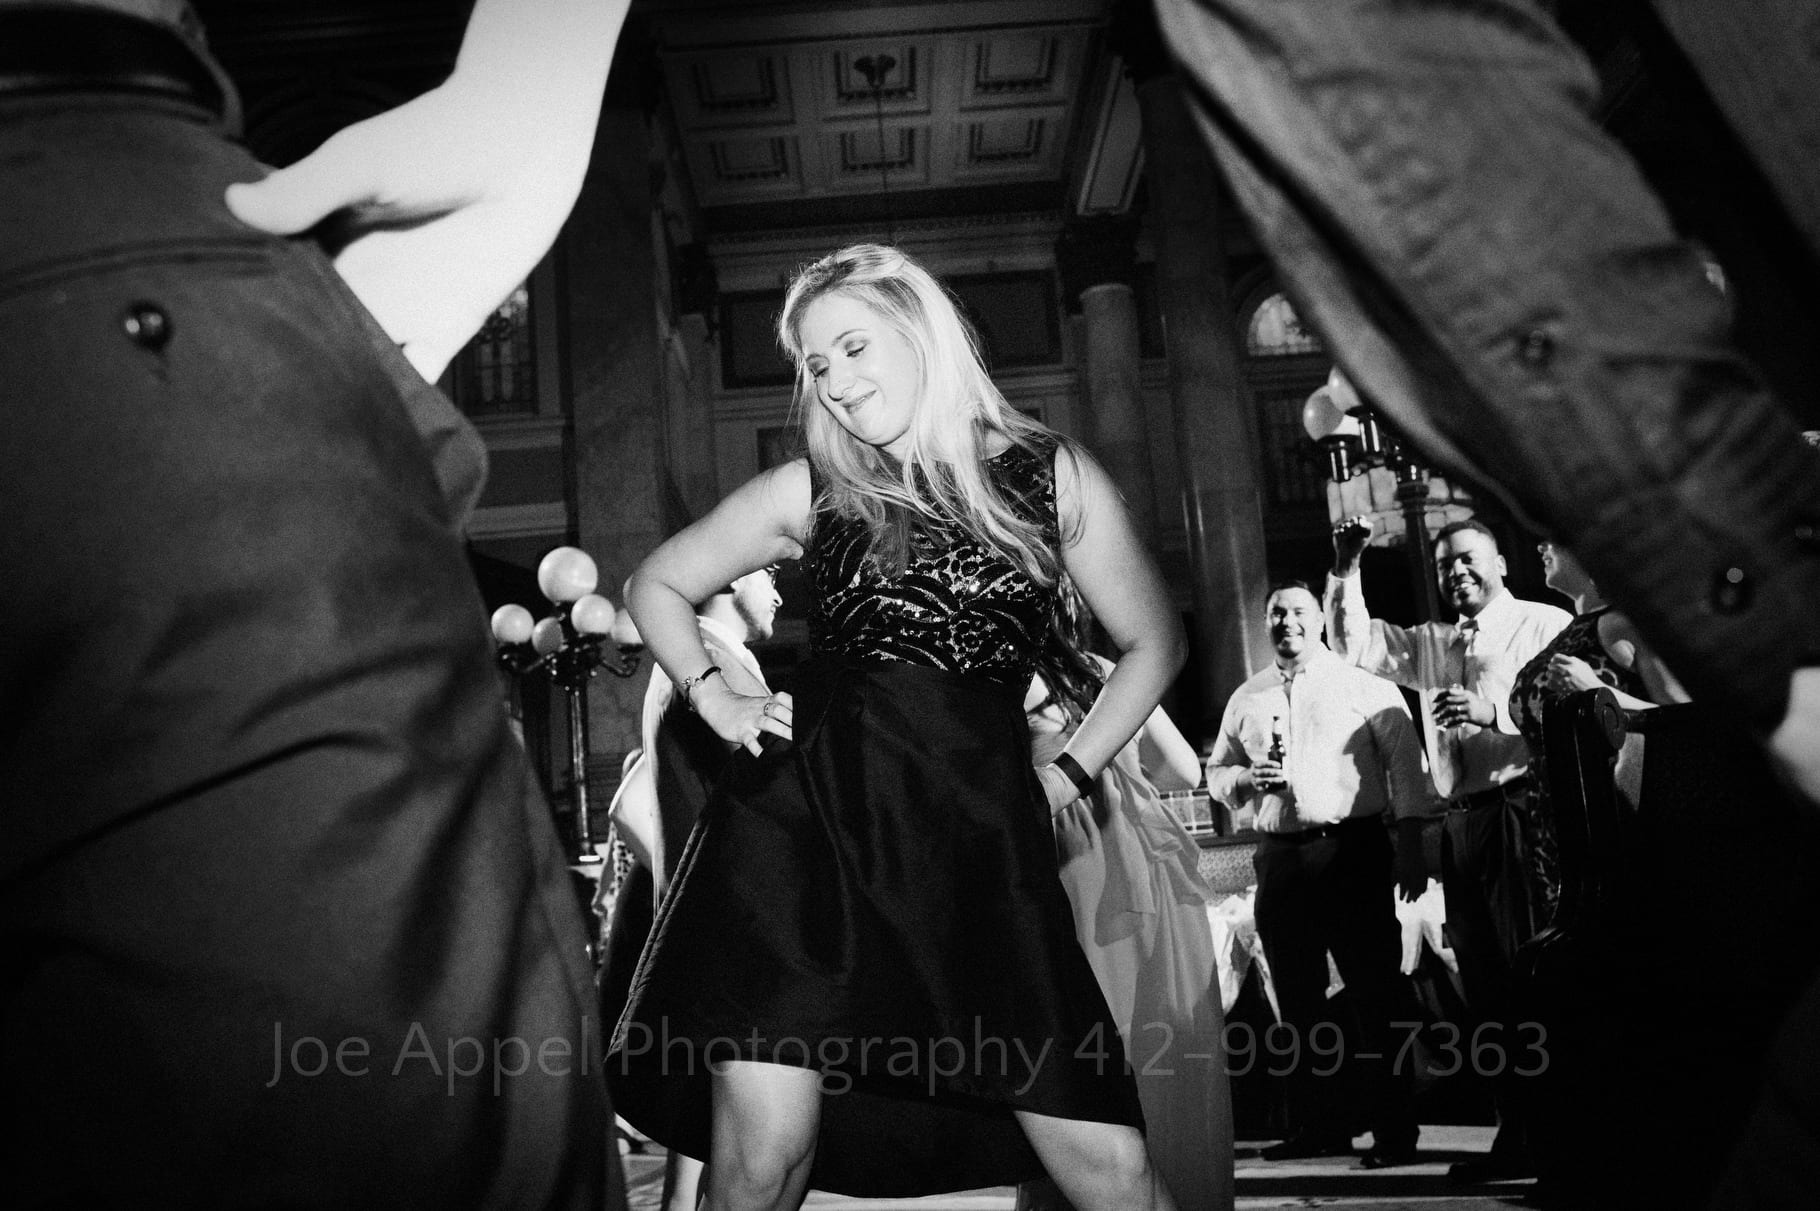 Framed by other guests, a woman dances with her hands on her hips during a Grand Concourse Wedding reception.